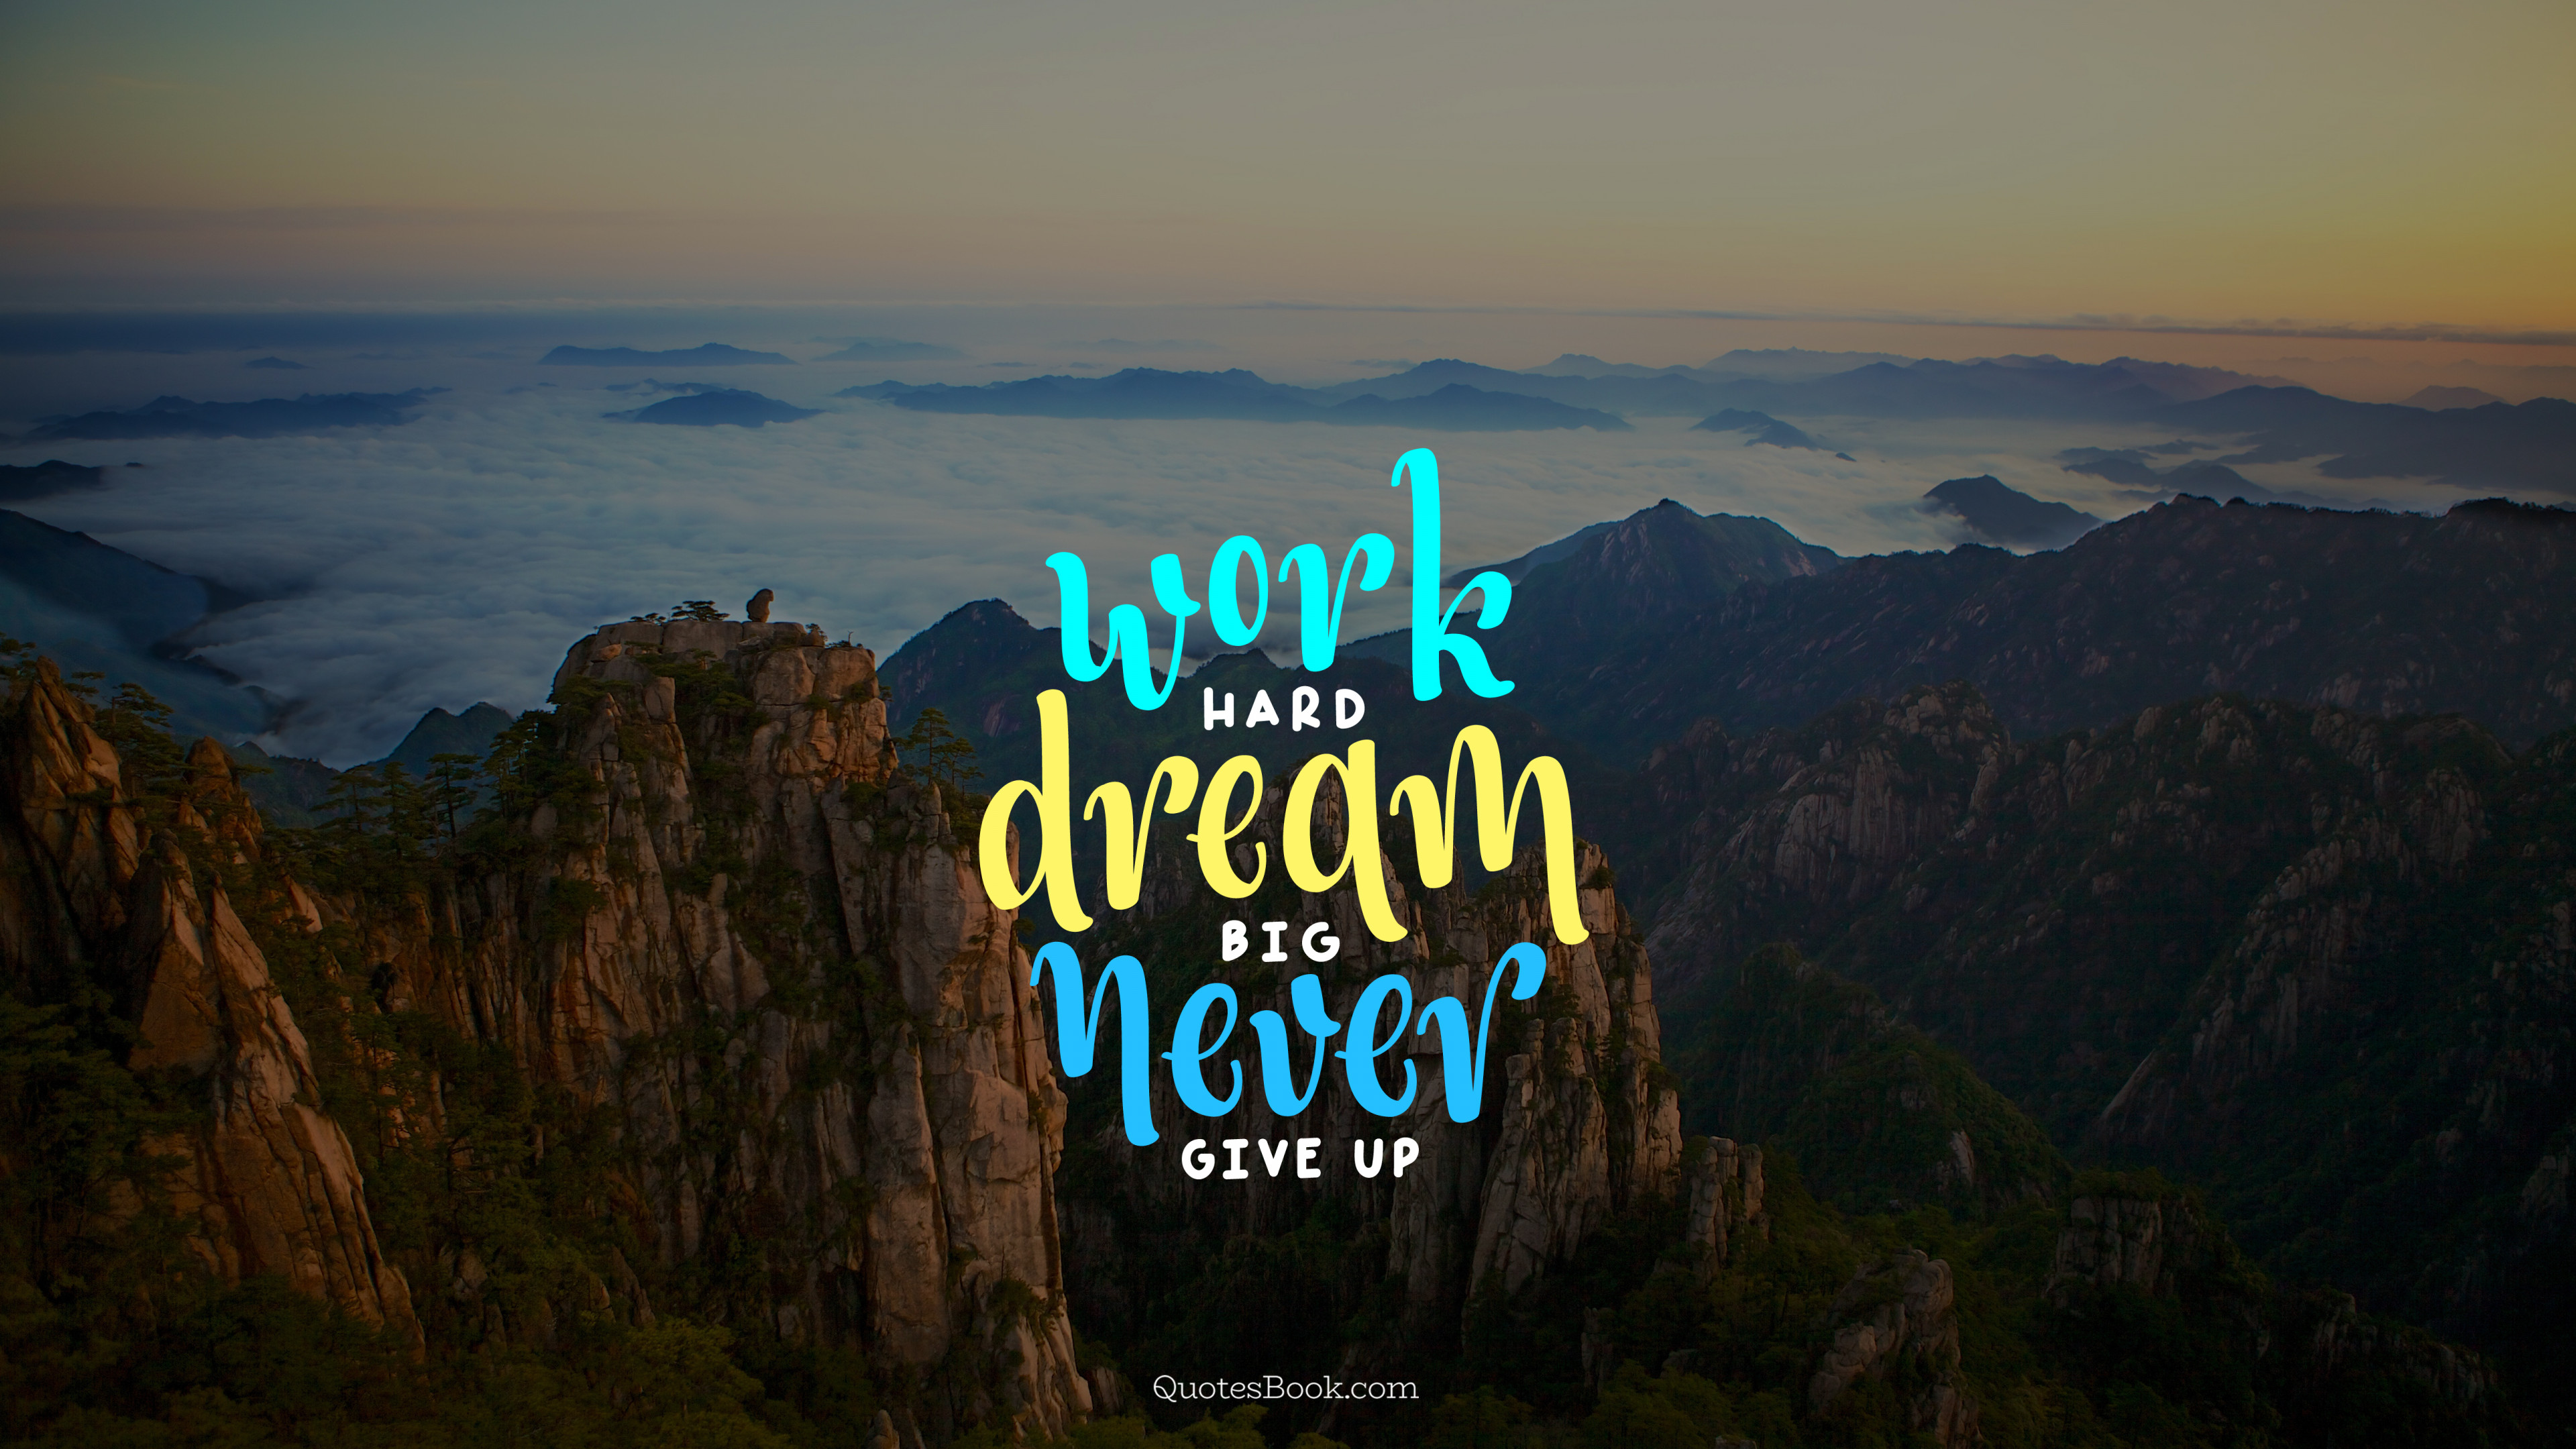 Work hard dream big never give up - Page 3 - QuotesBook